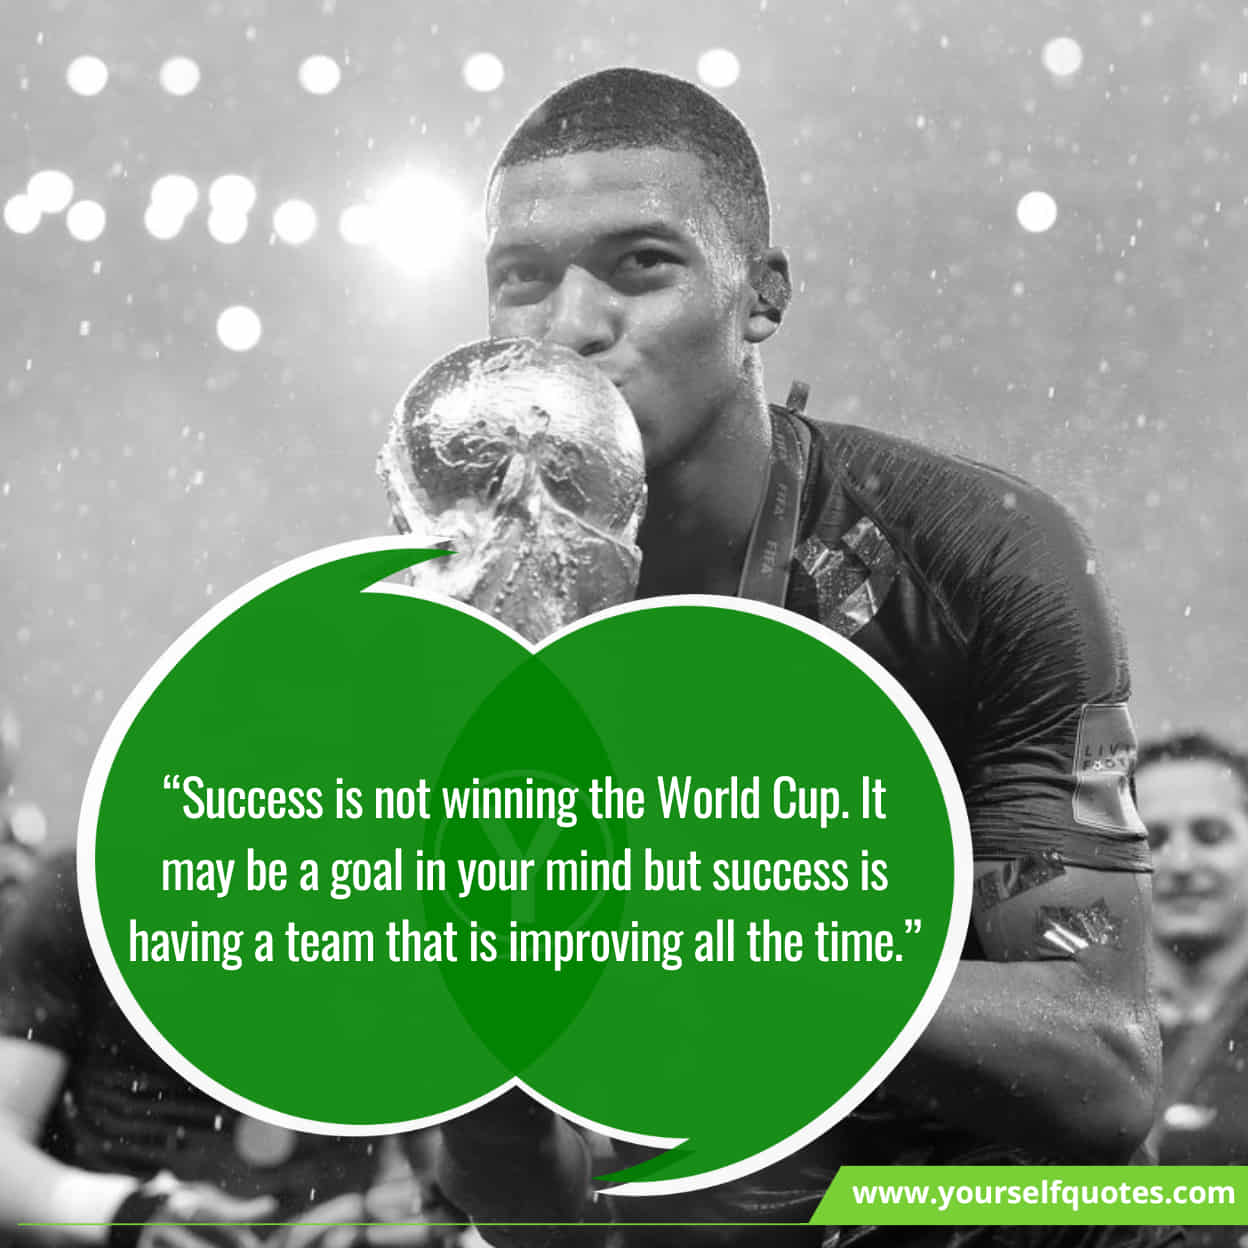 FIFA World Cup Quotes On Success